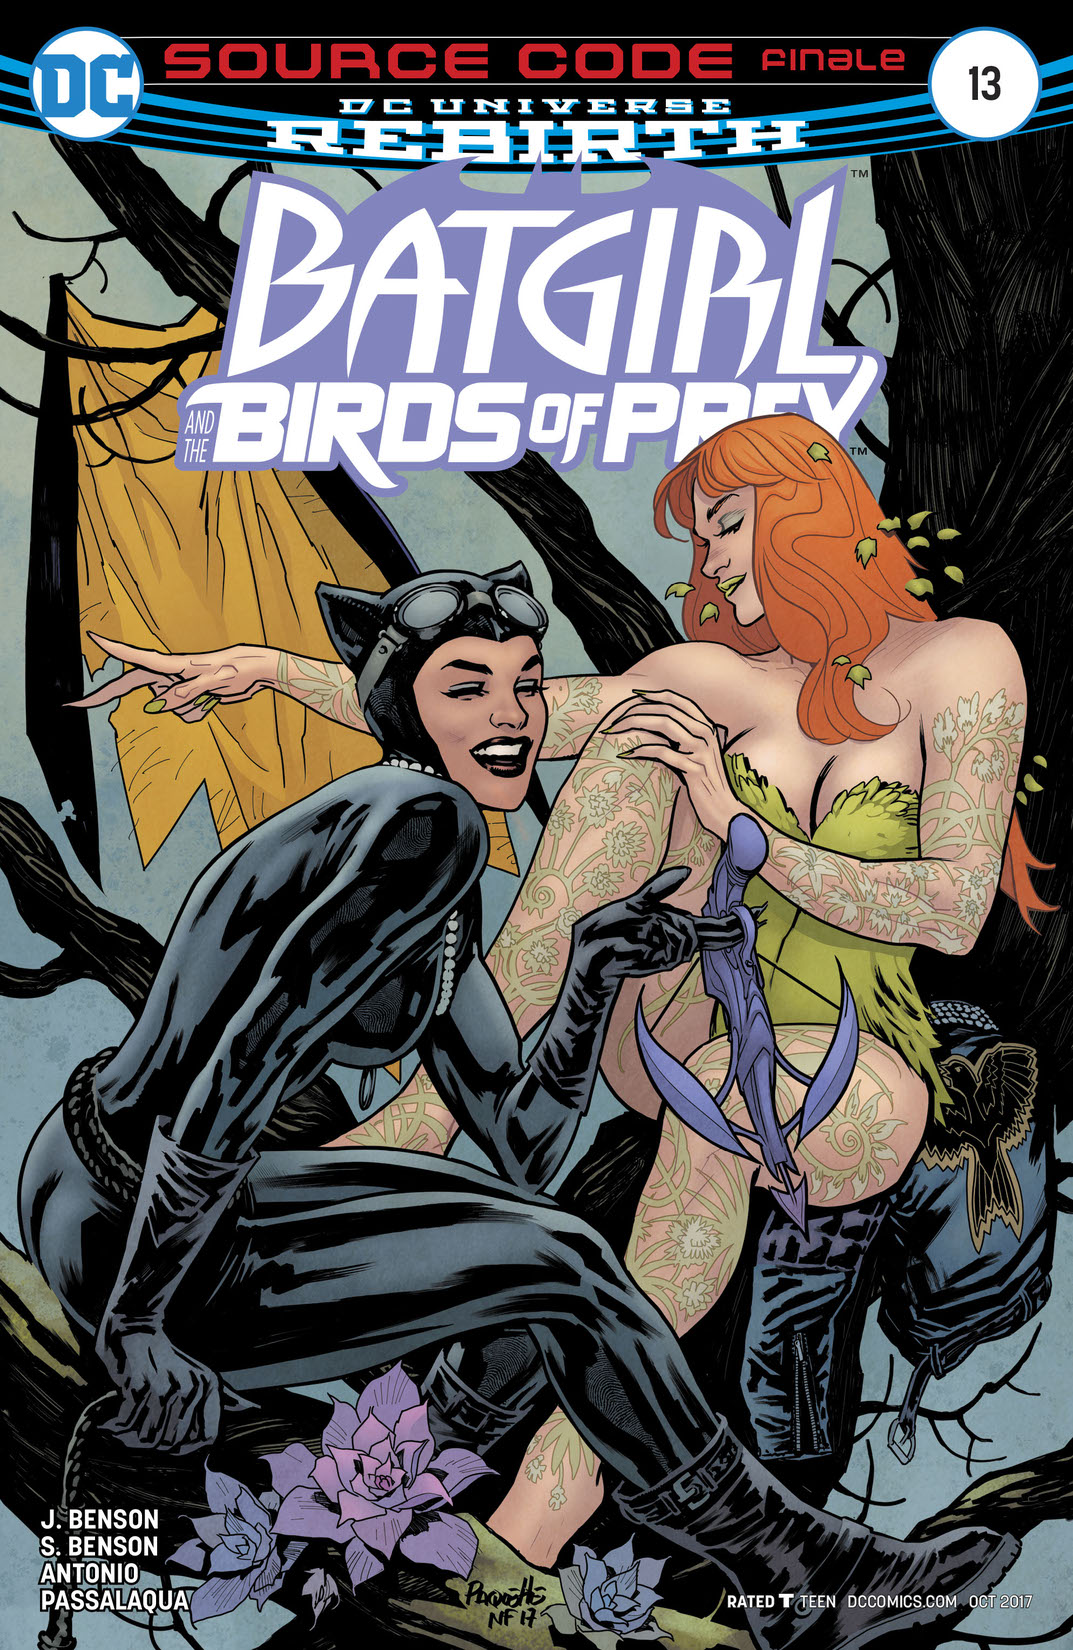 Batgirl and the Birds of Prey #13 preview images